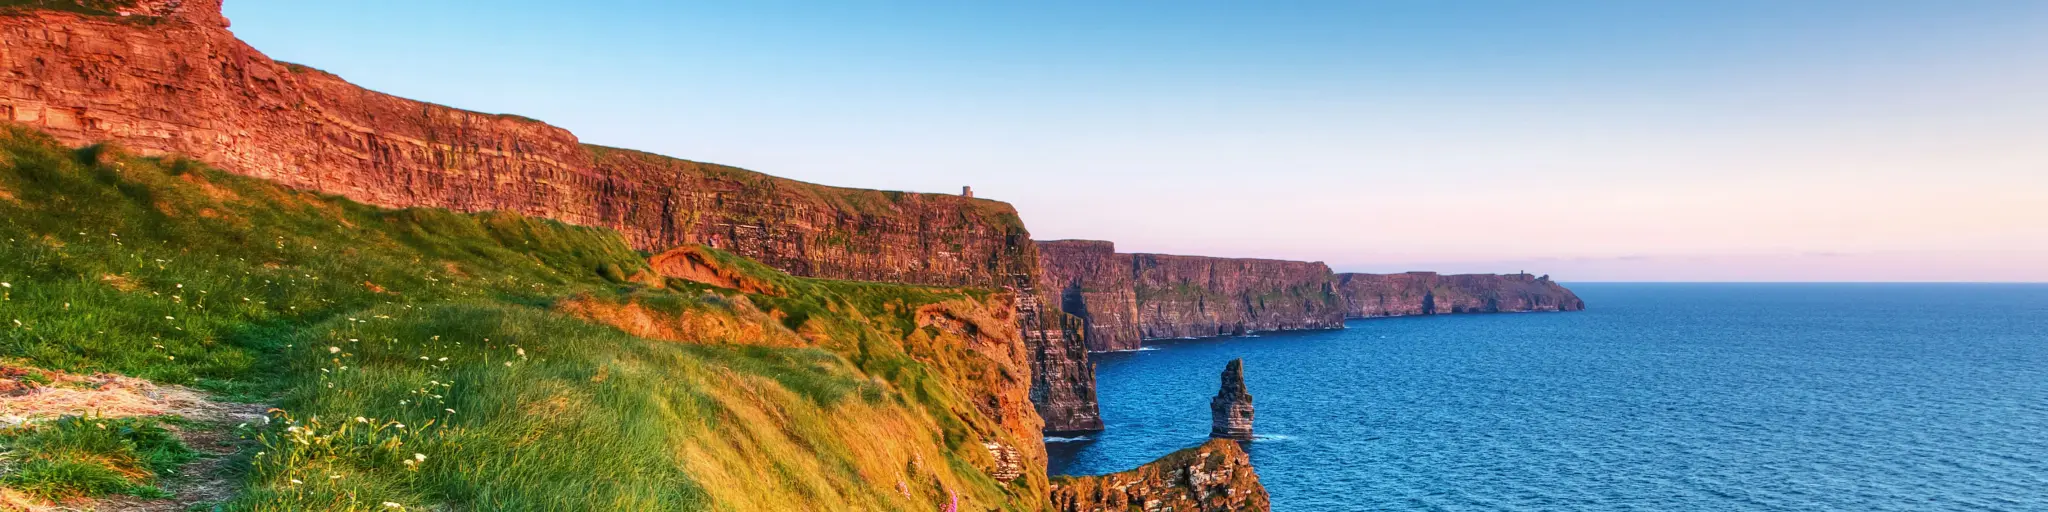 A view out towards the jagged cliffs at the Cliffs of Moher, Ireland, at sunset